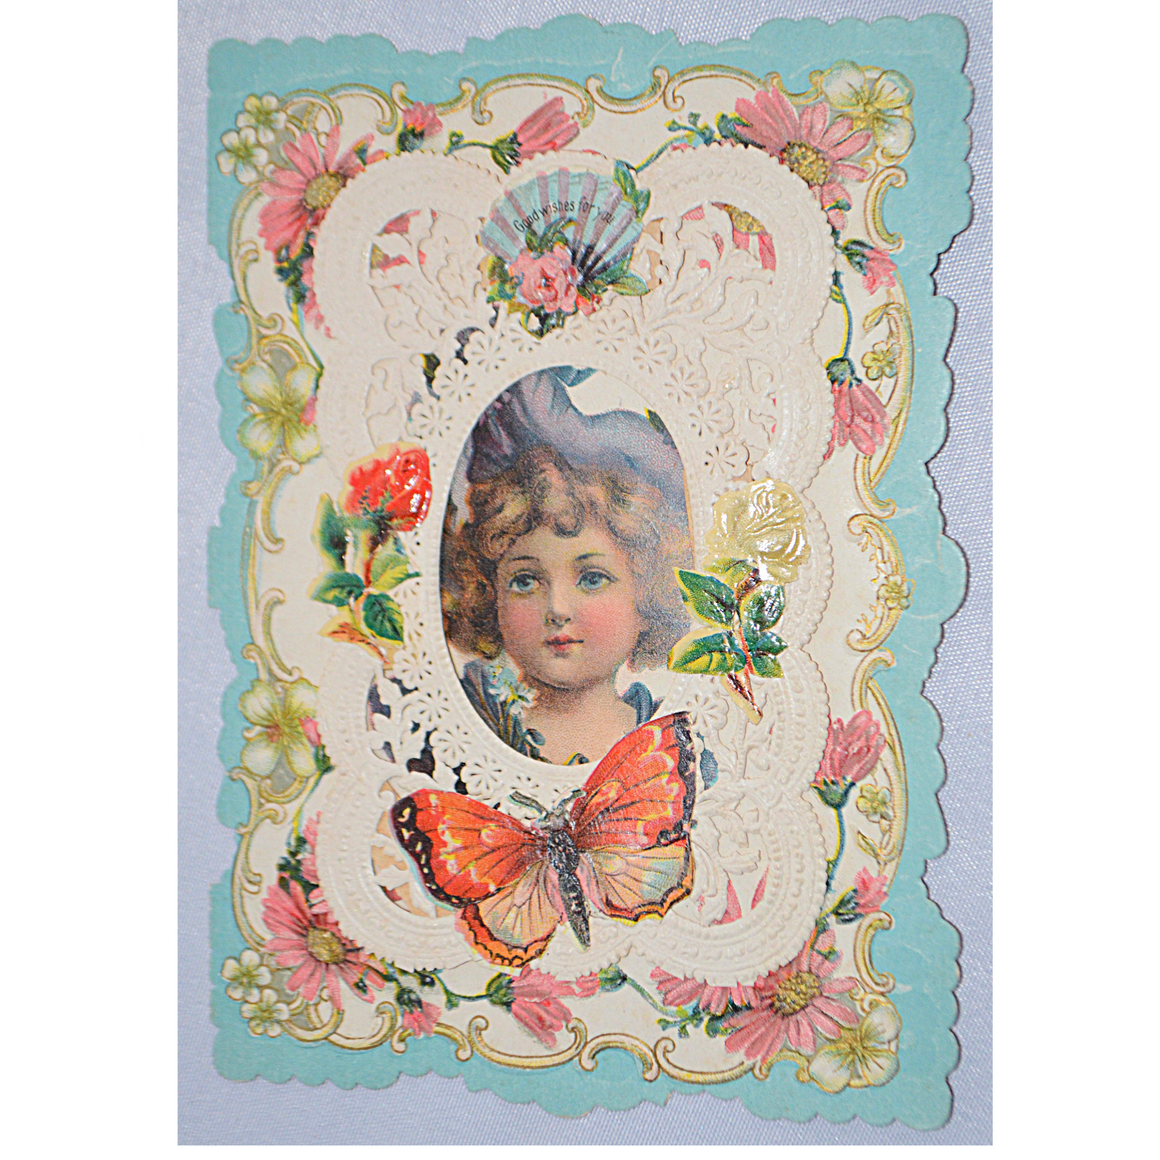 Die Cut Embossed Antique Valentine Card Chromolithograph Little Girl with Butterflies & Dresden Paper Lace